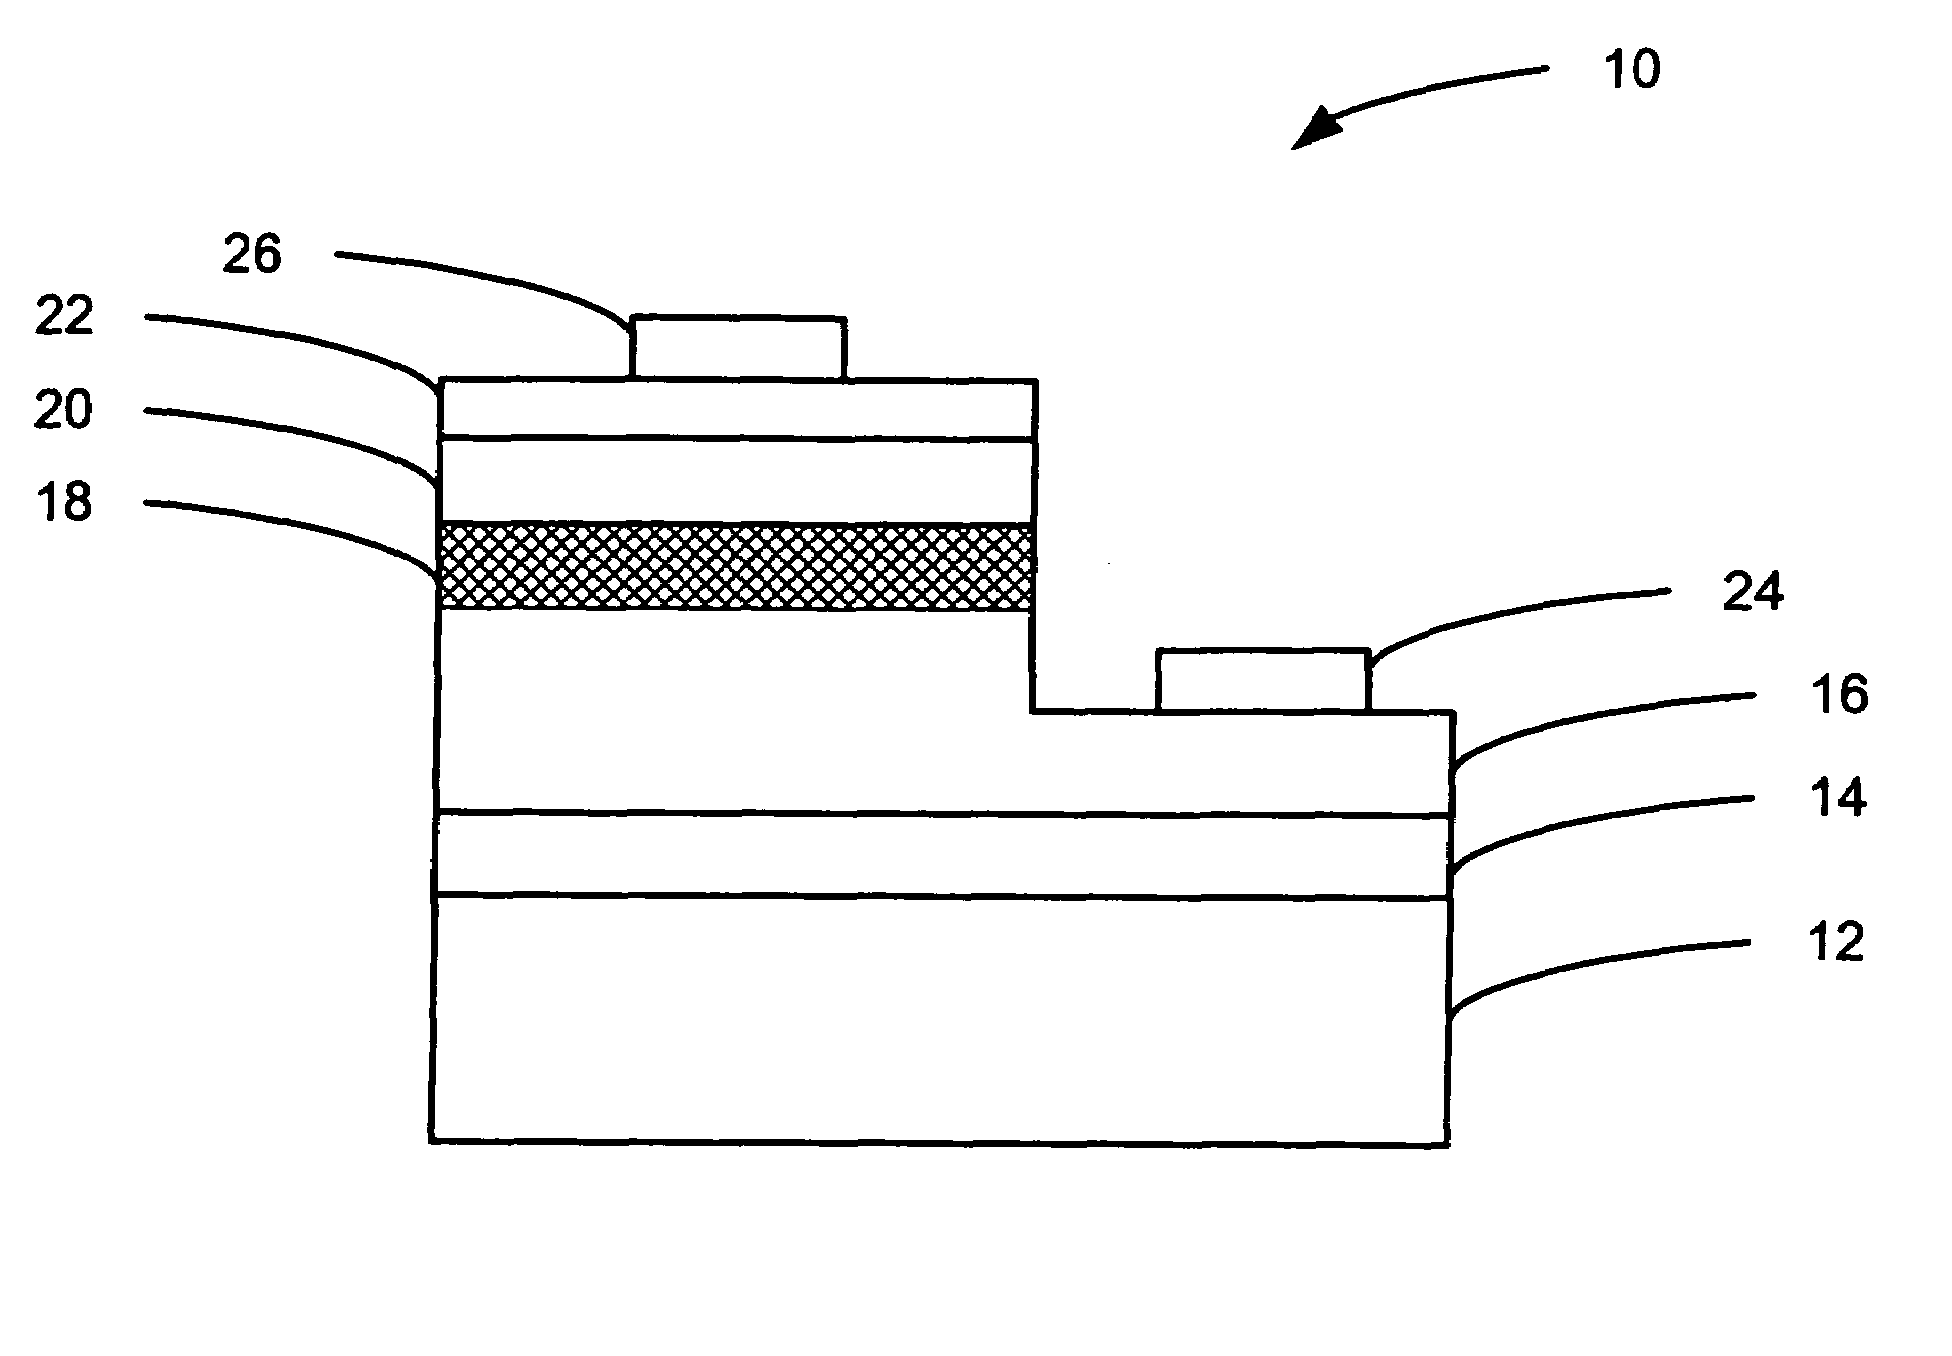 Method of manufacturing an ultraviolet light emitting AlGaN composition and ultraviolet light emitting device containing same